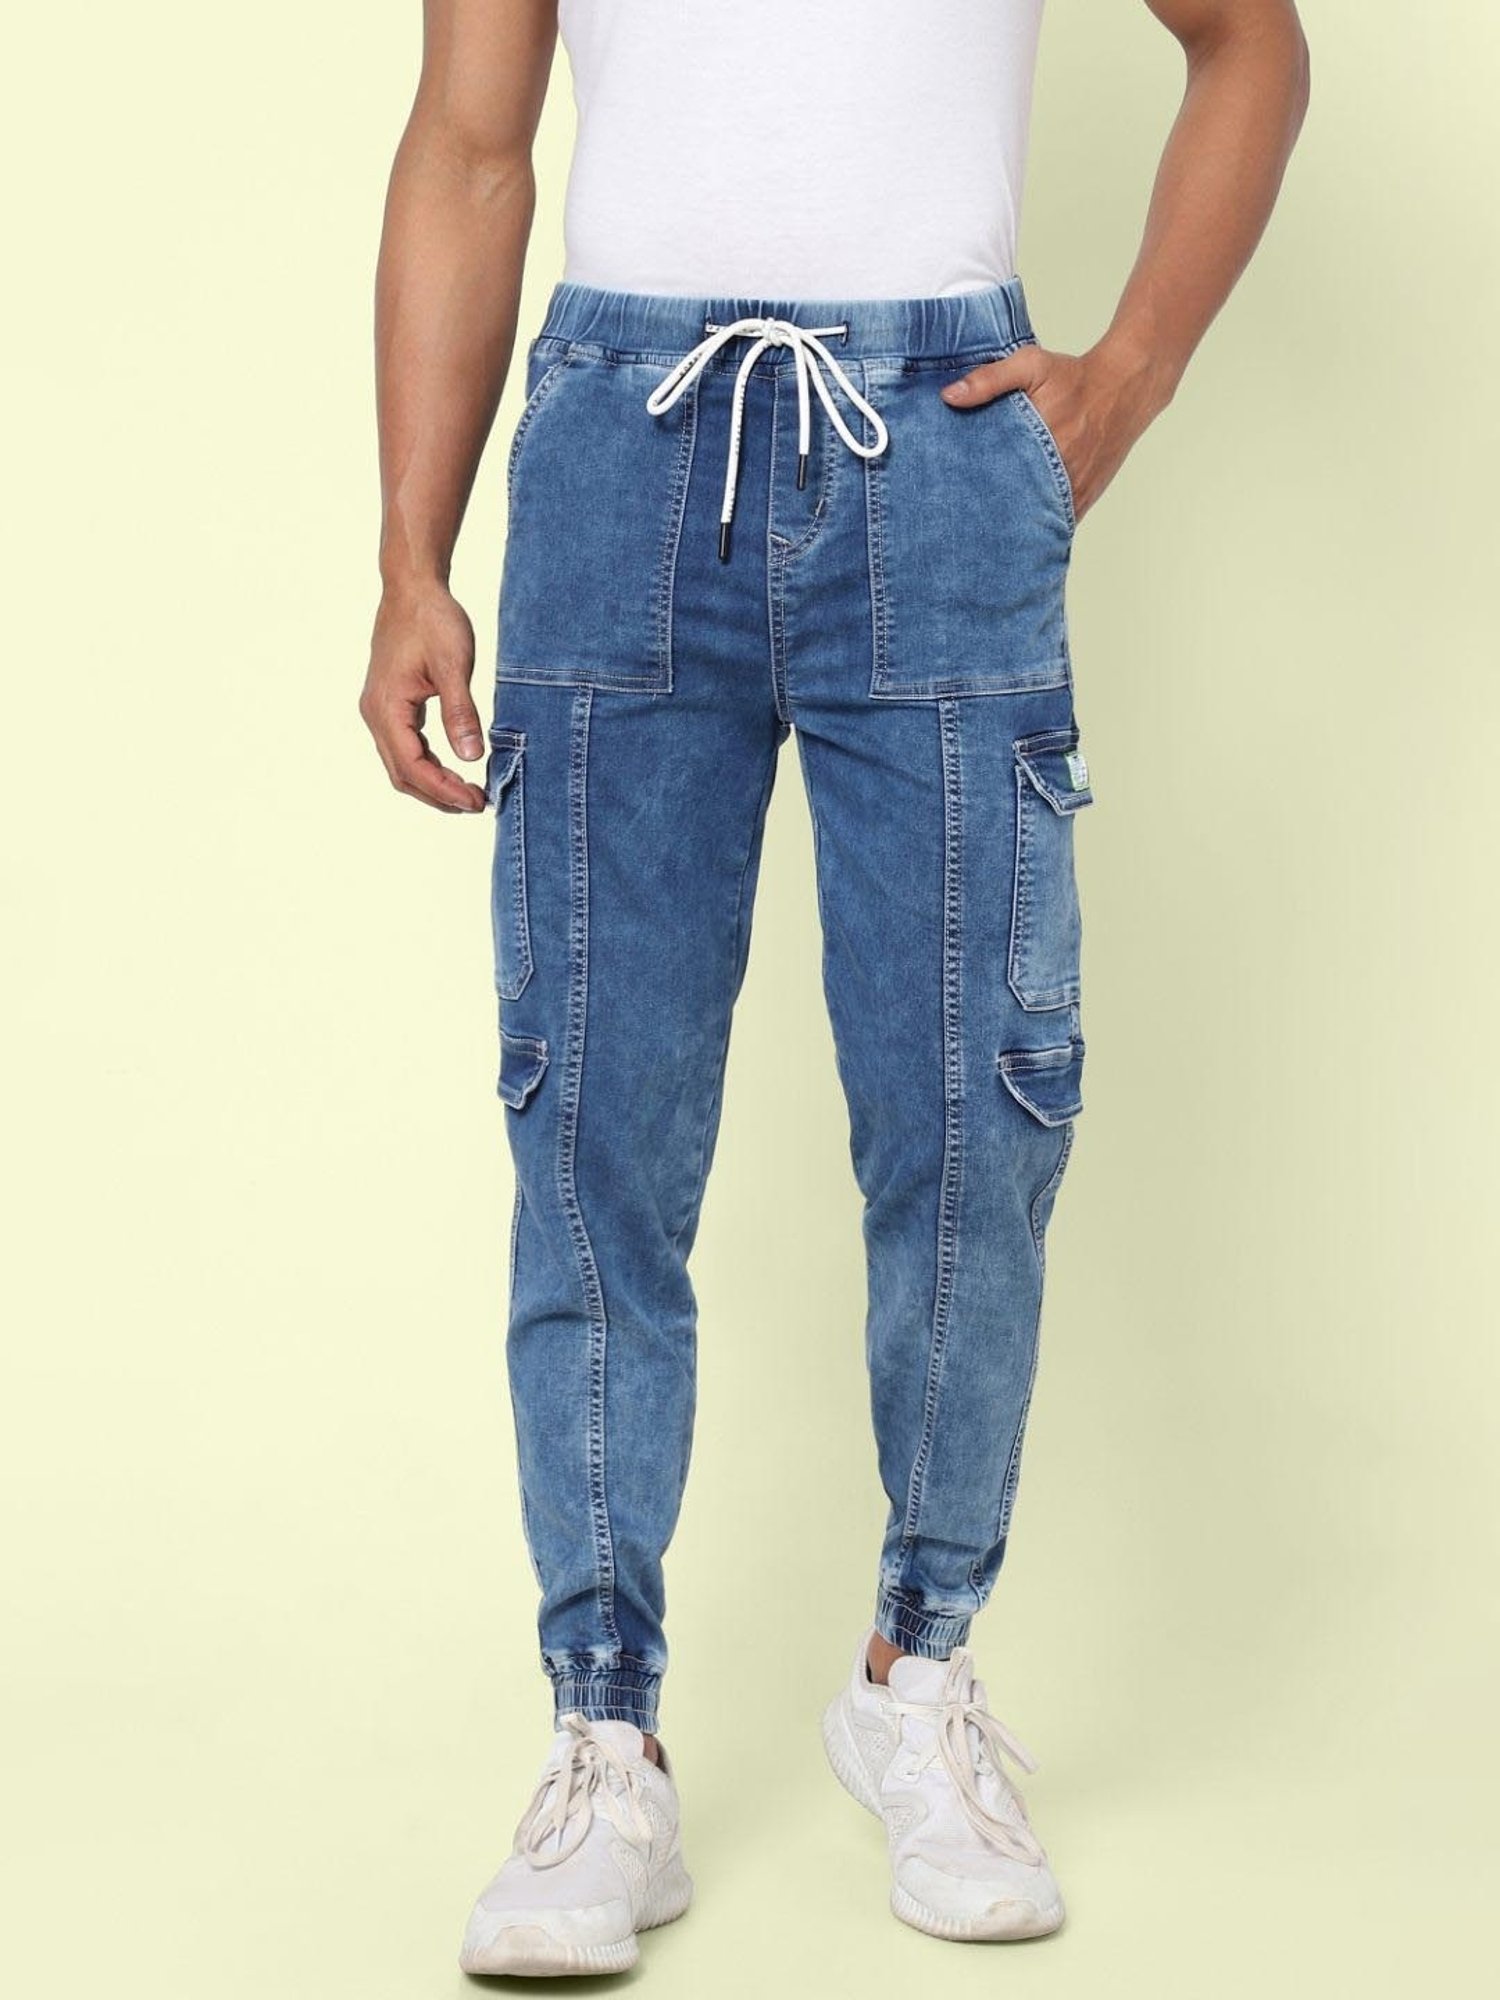 Best Offers on Cargo jeans upto 2071 off  Limited period sale  AJIO